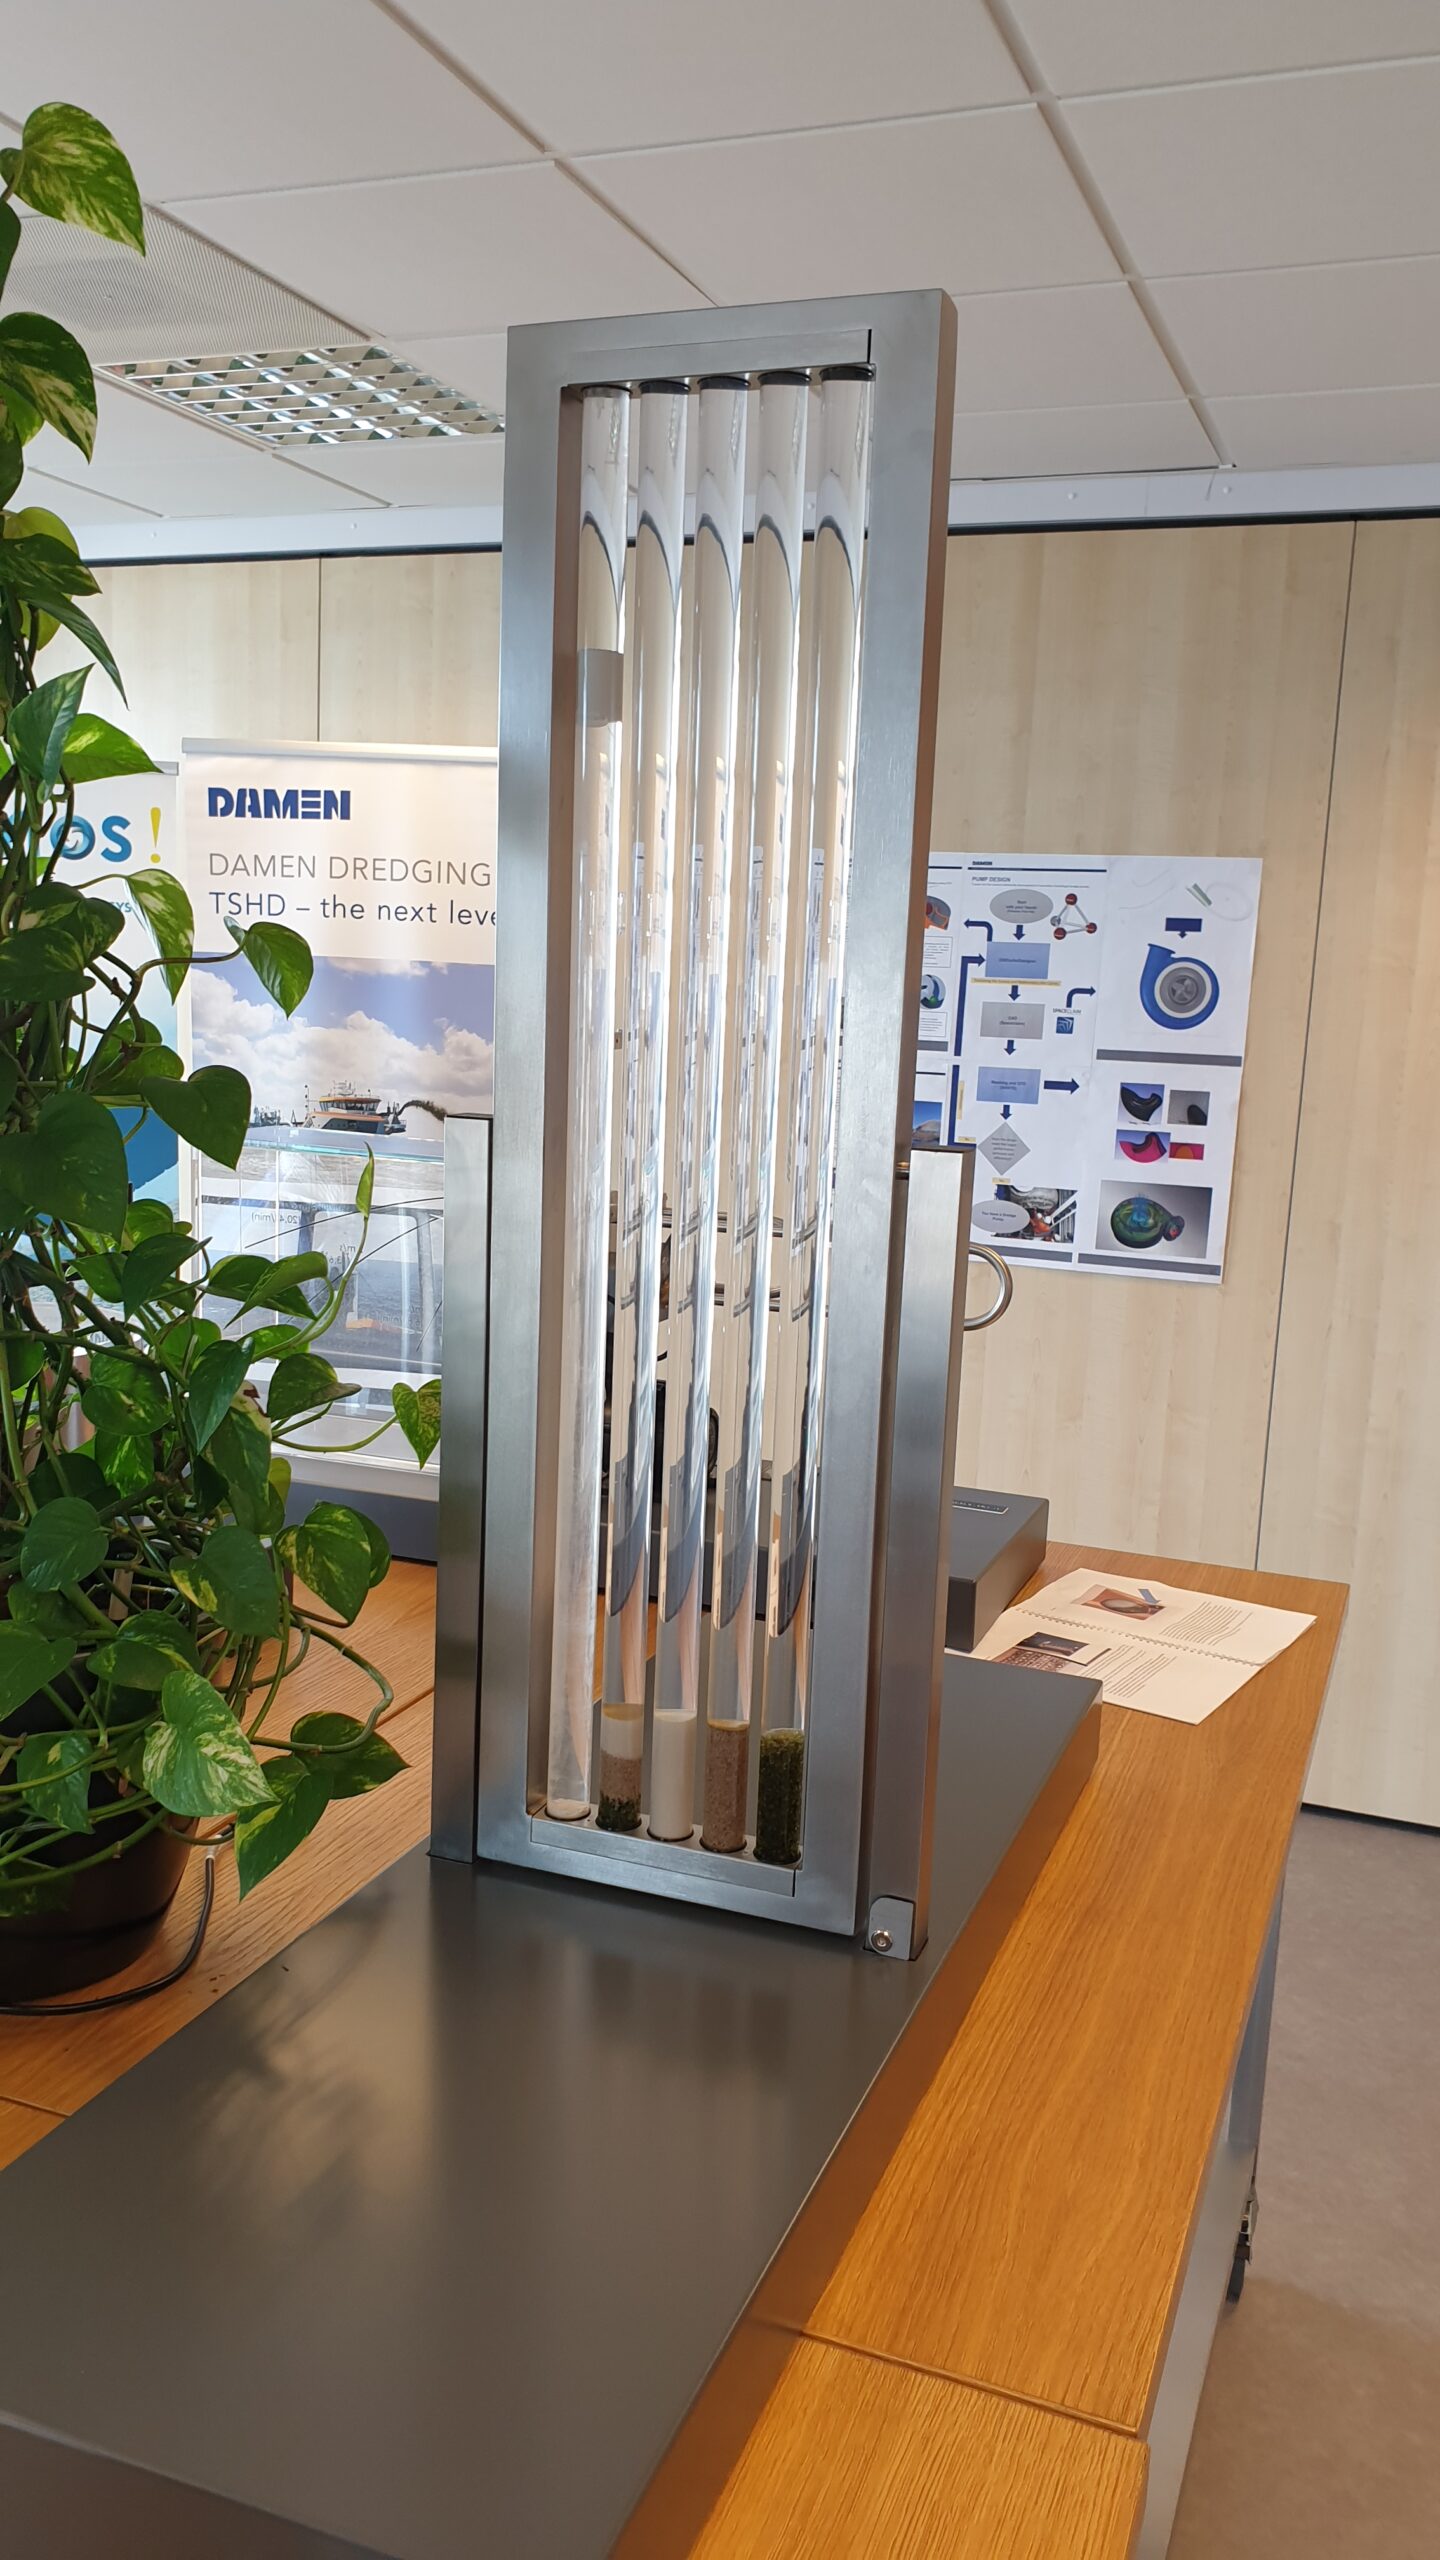 New settling and sedimentation exhibit at the Damen Dredging Experience